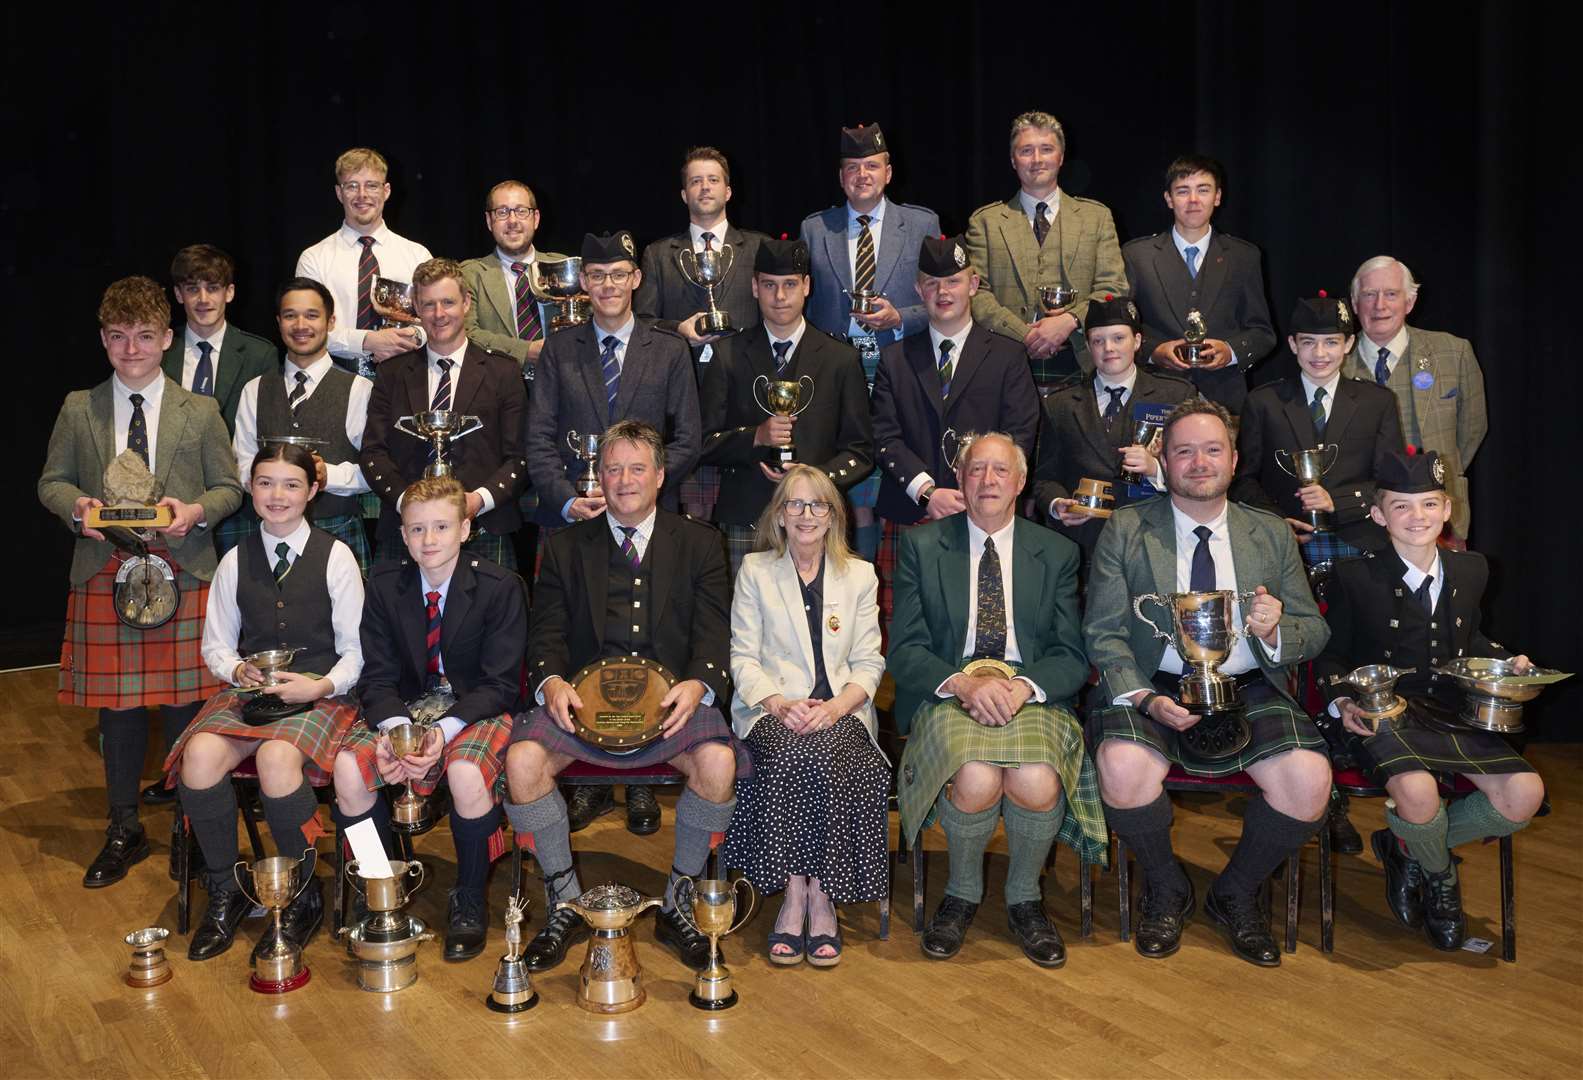 Group photo featuring the Provost, Lord Godfrey Macadonald and Chairman NMPC with prize winners.